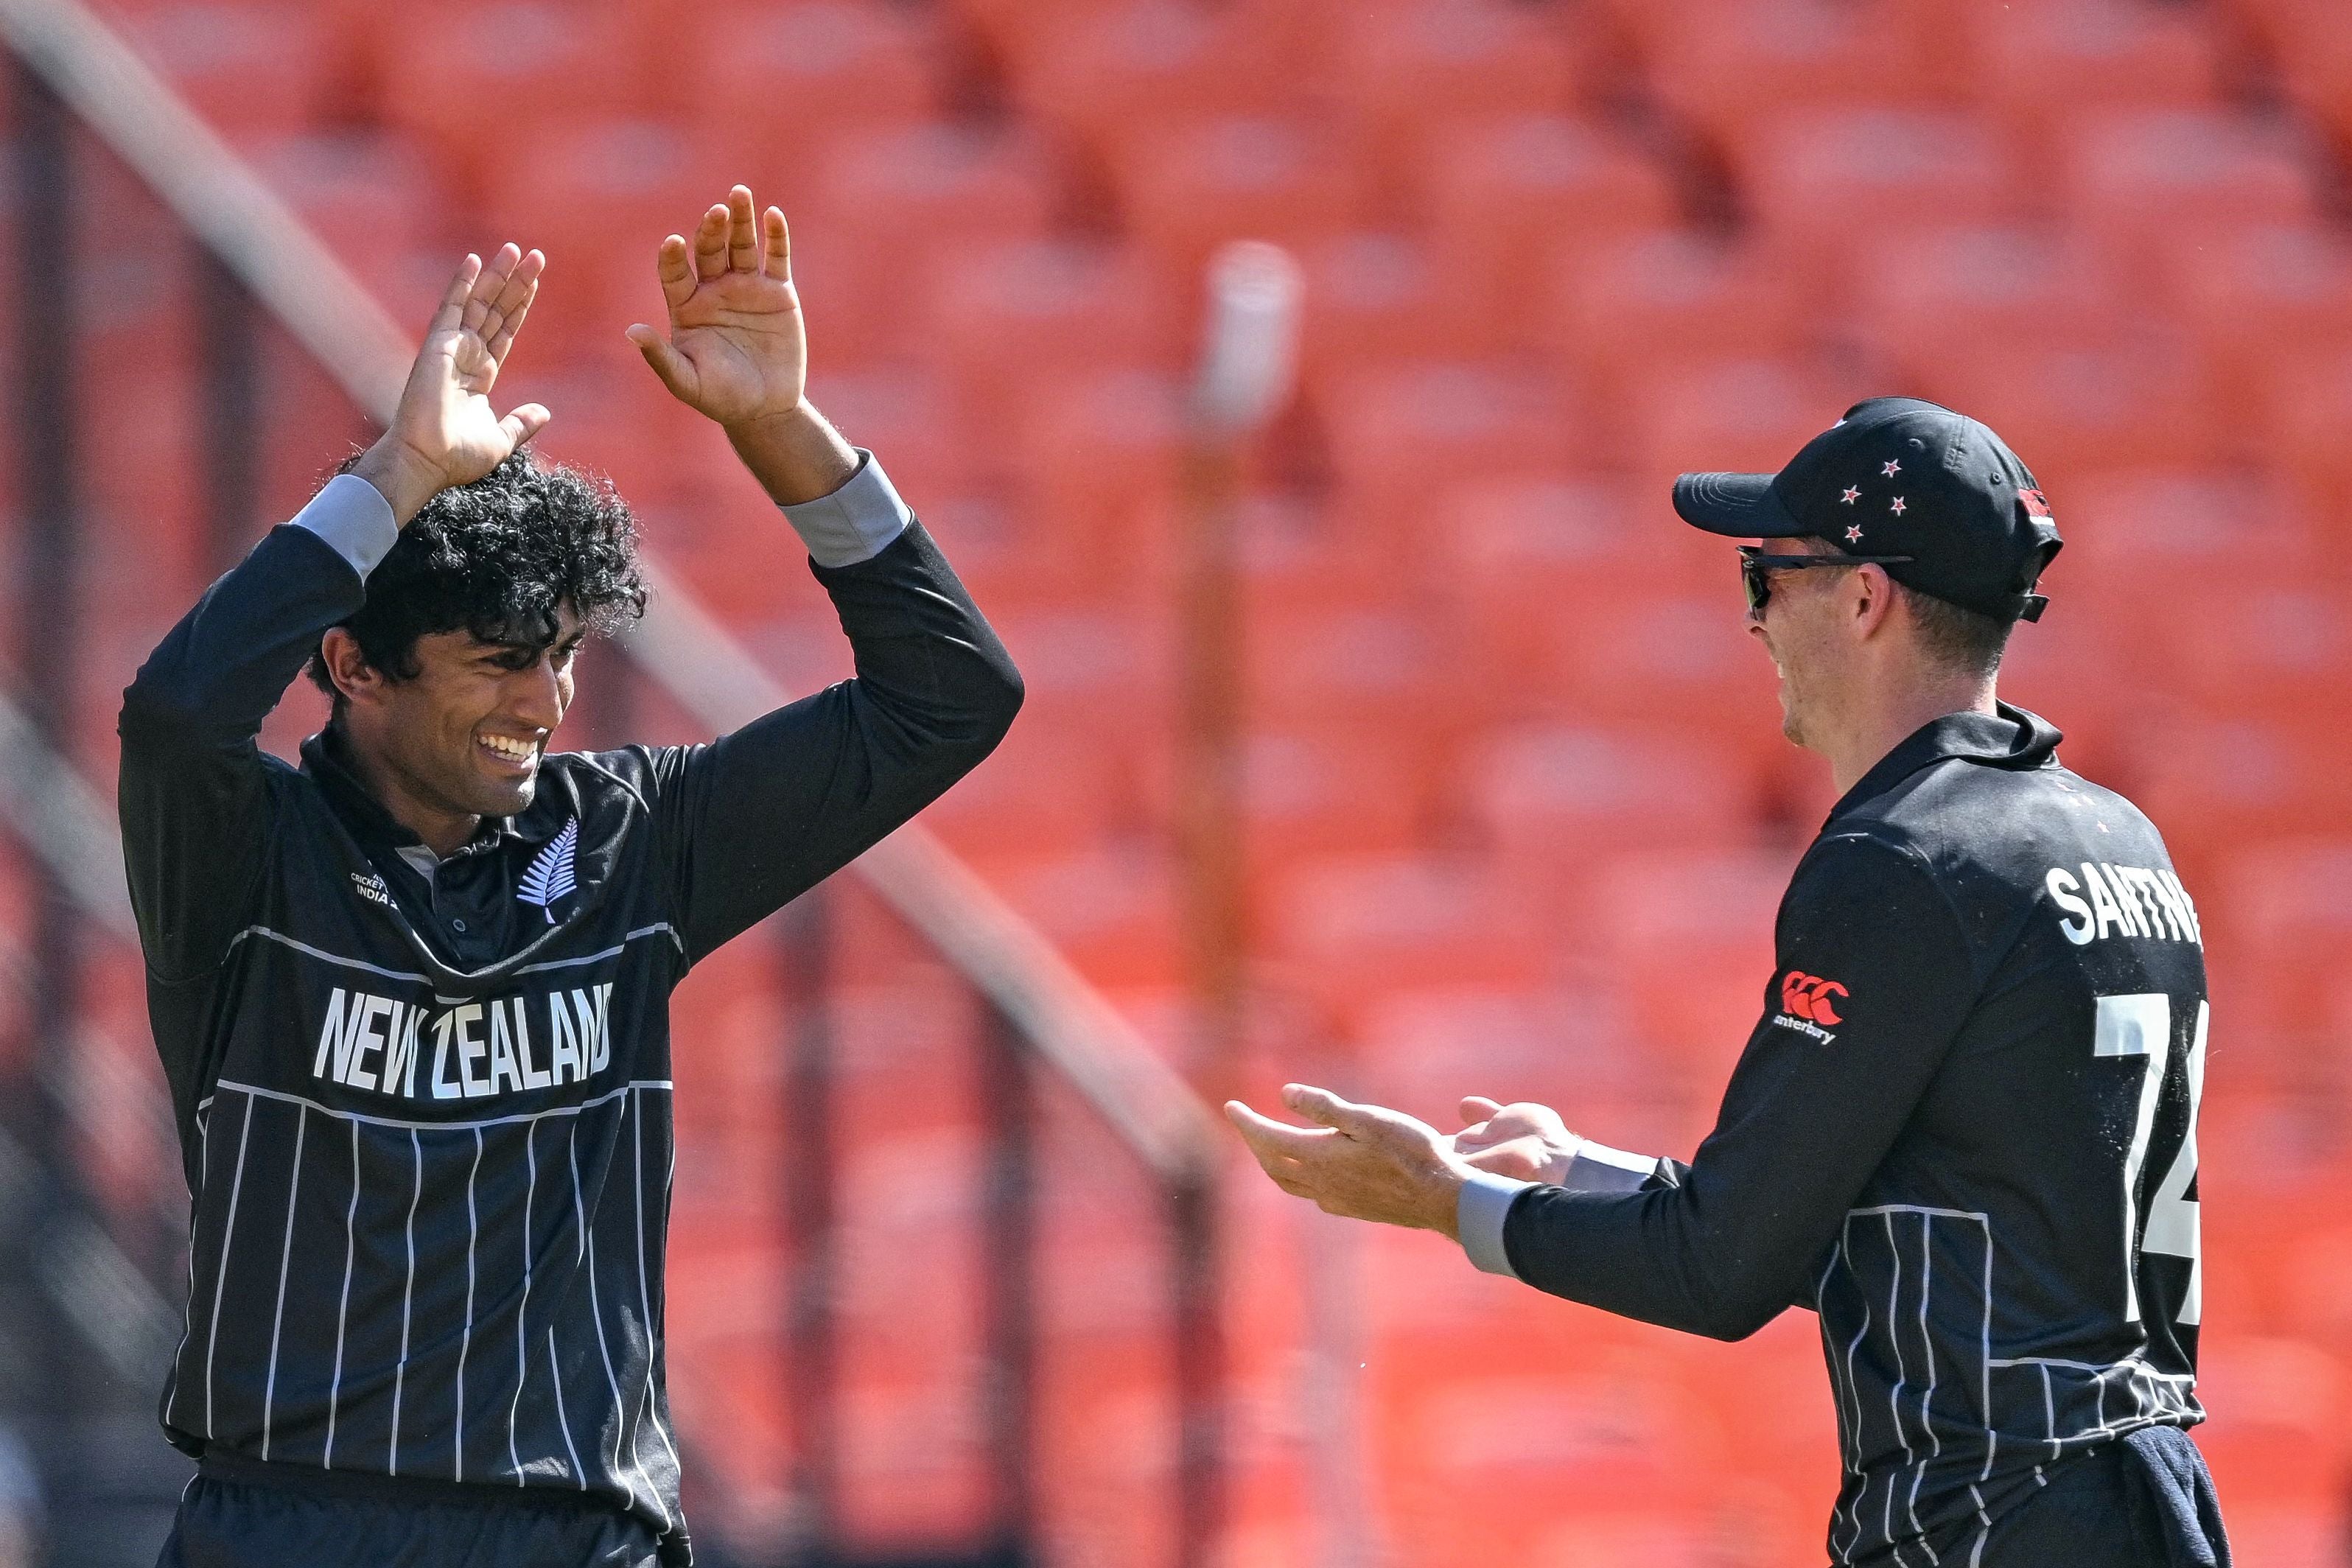 Rachin Ravindra celebrates with his teammate after taking the wicket of England’s Harry Brook during the 2023 ICC men’s cricket World Cup one-day international (ODI) match between England and New Zealand